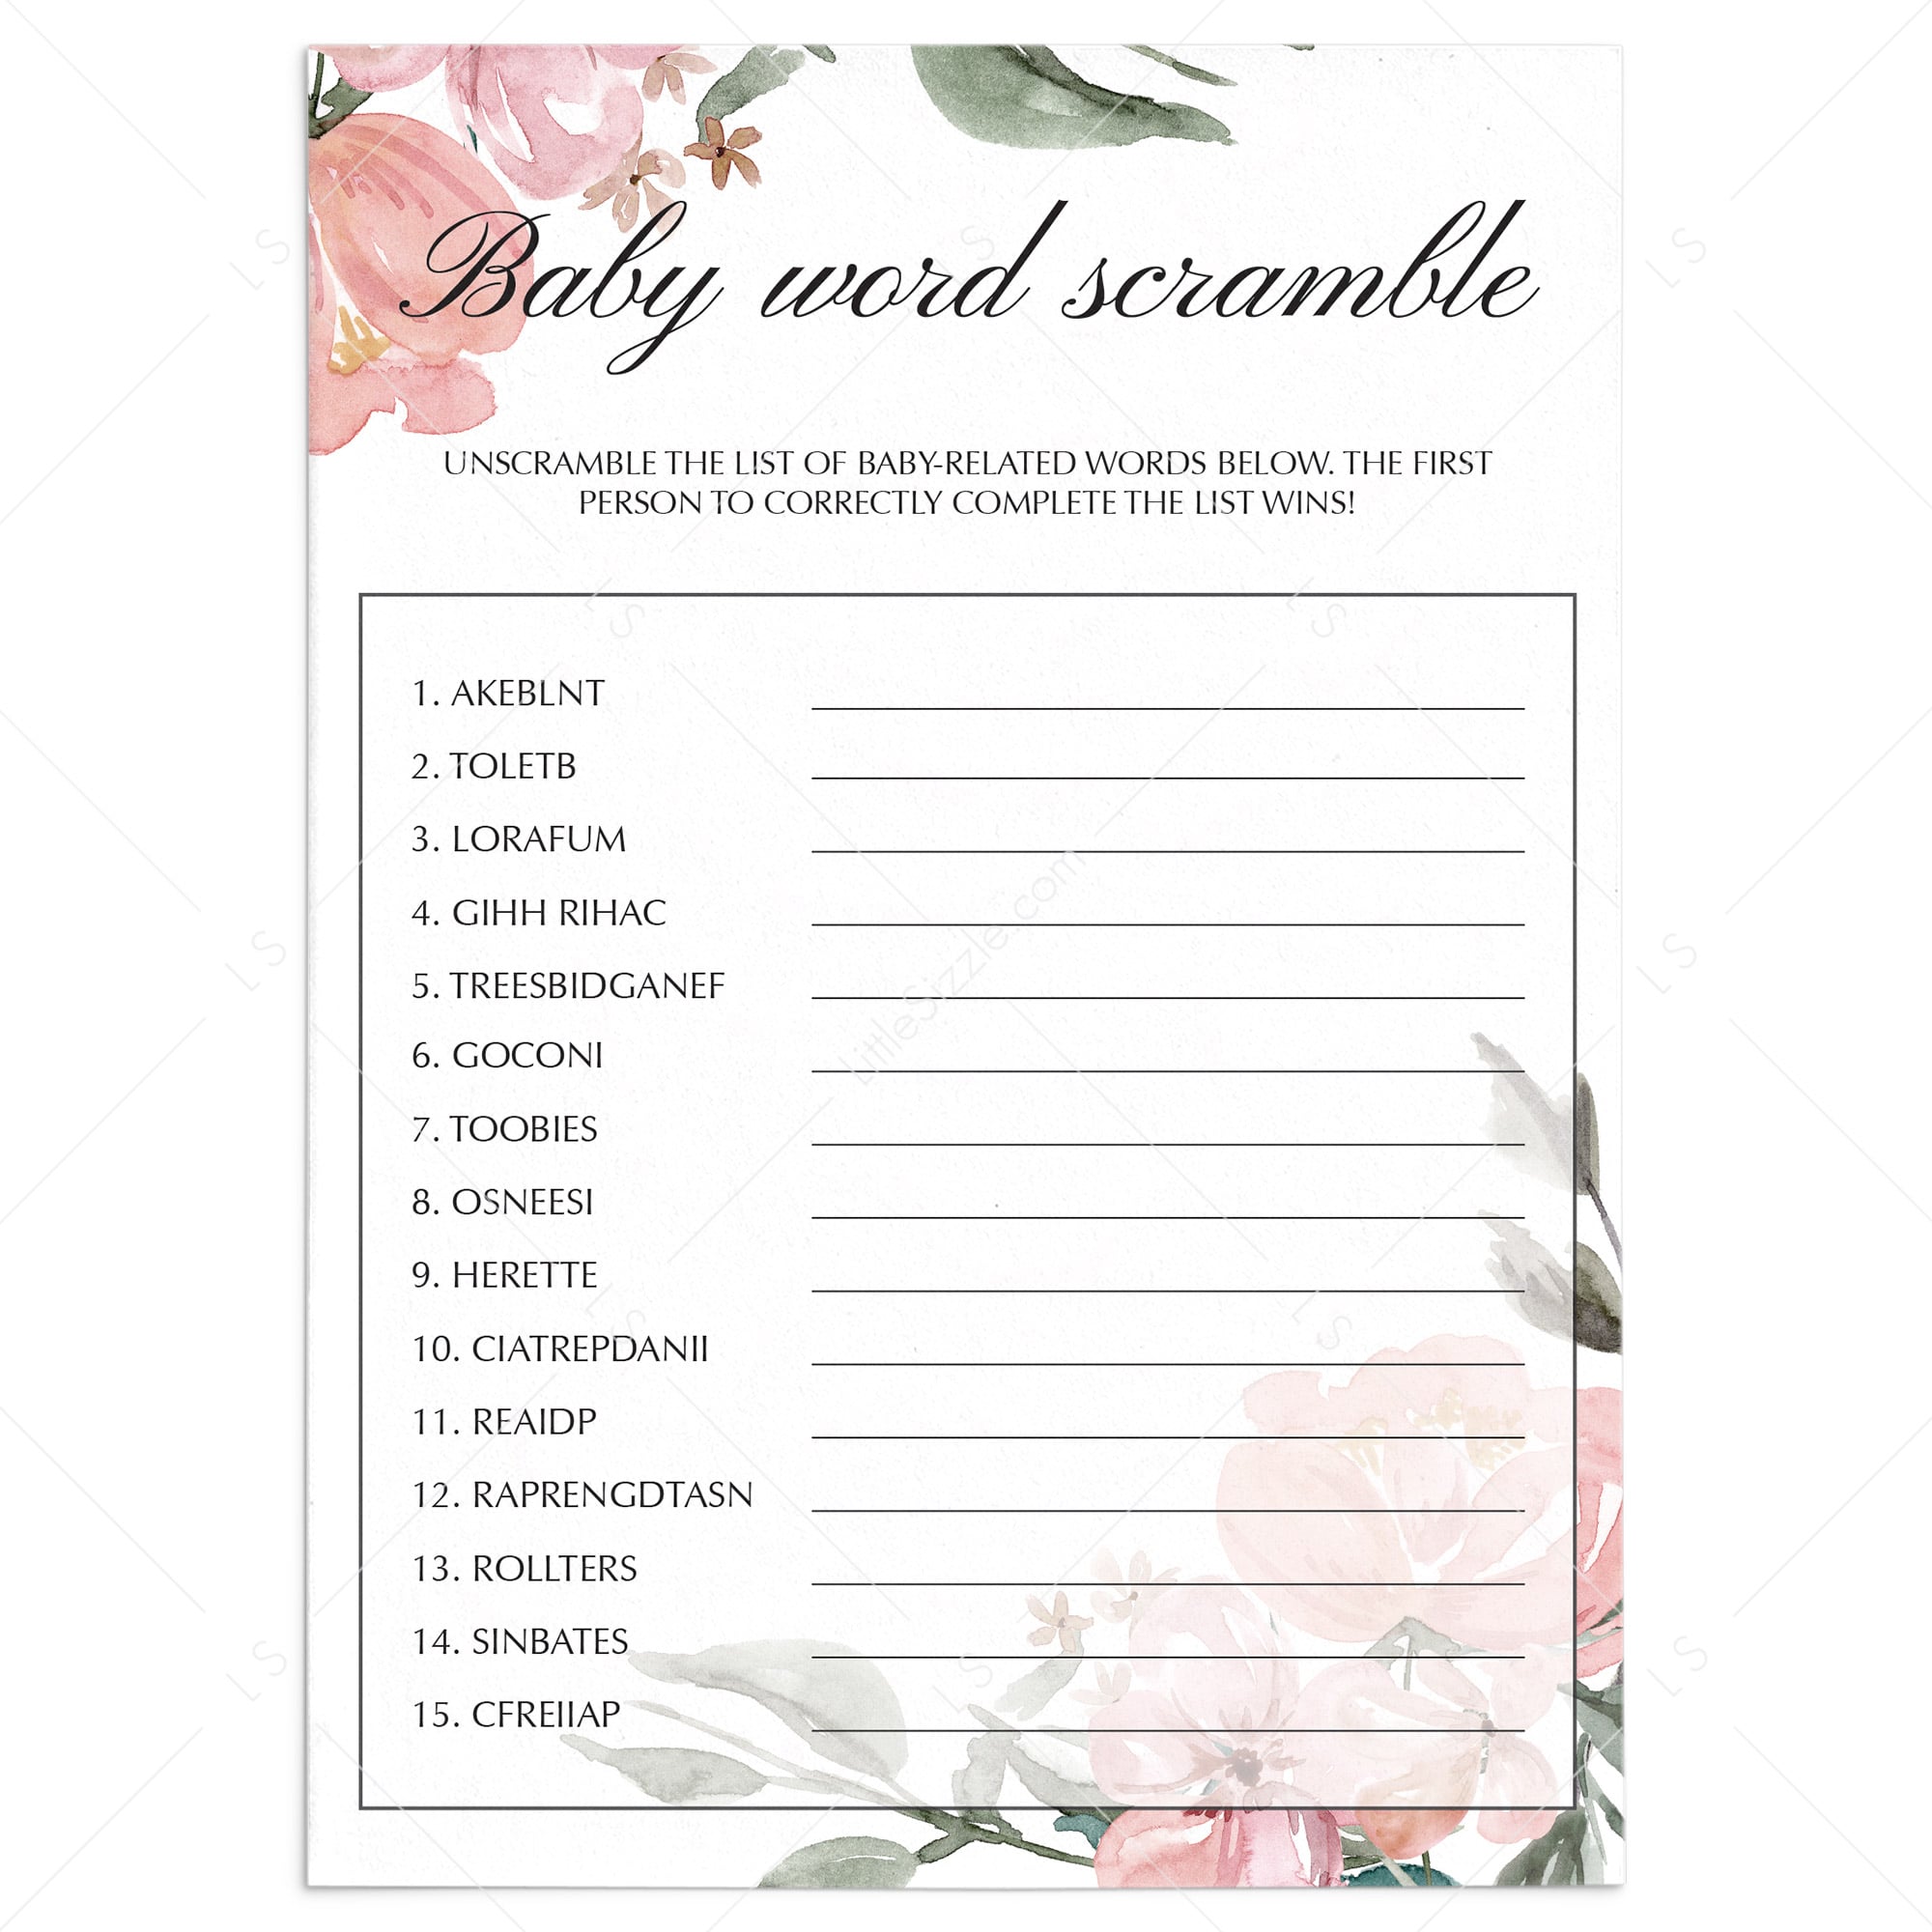 Baby shower word scramble game for neutral shower by LittleSizzle